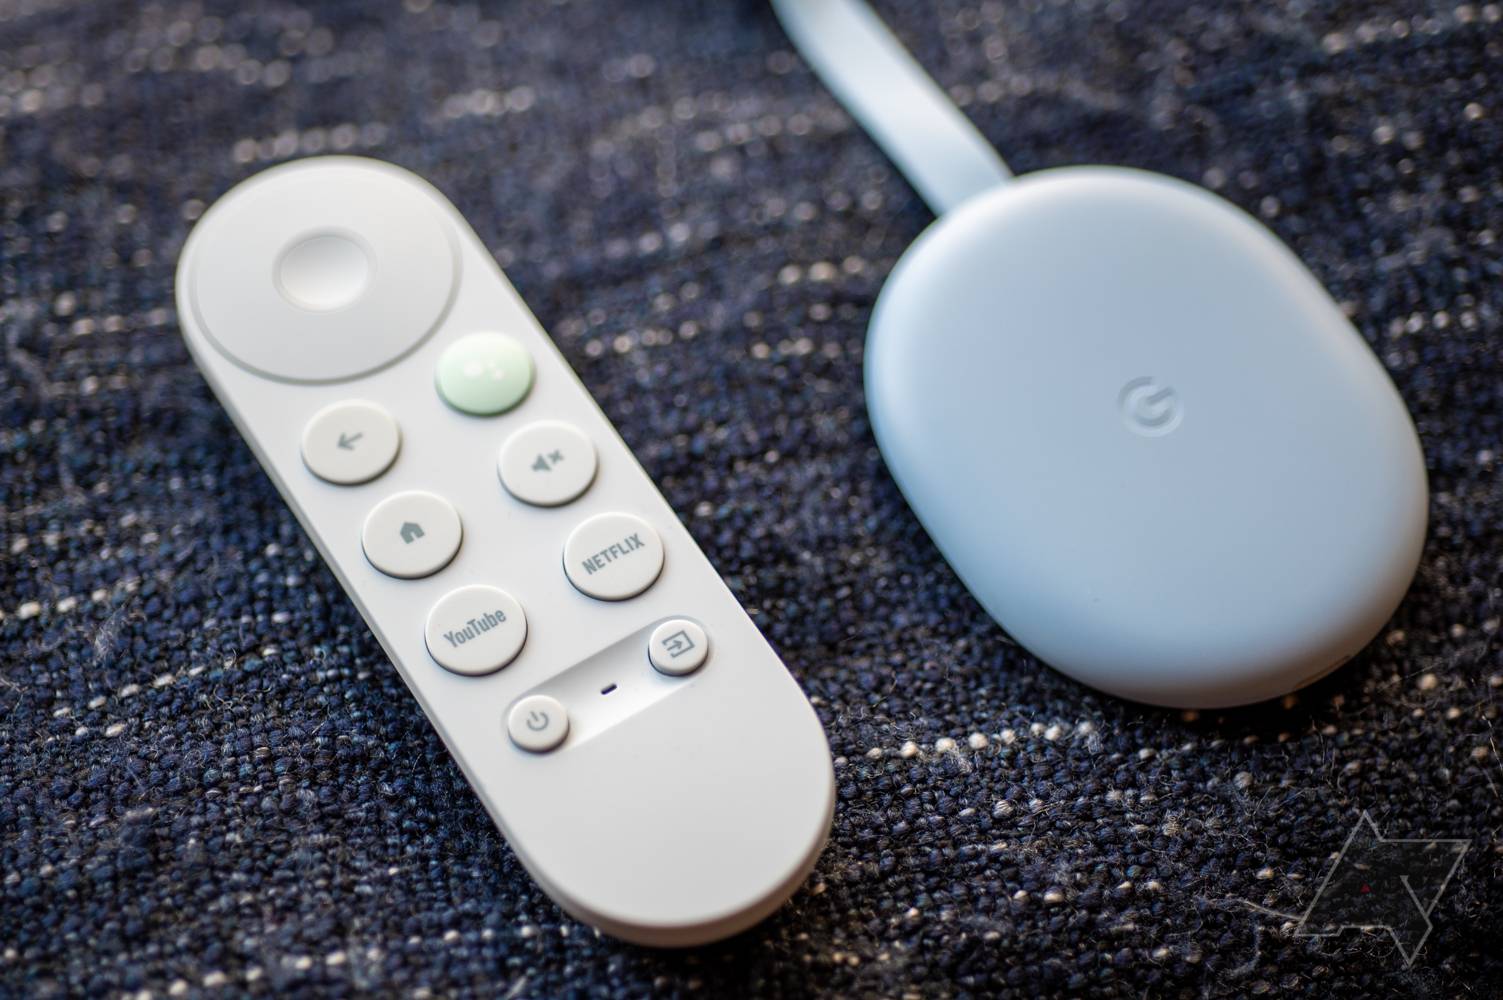 Google's rumored 1080p Chromecast HD with Google TV may have just swung by the FCC